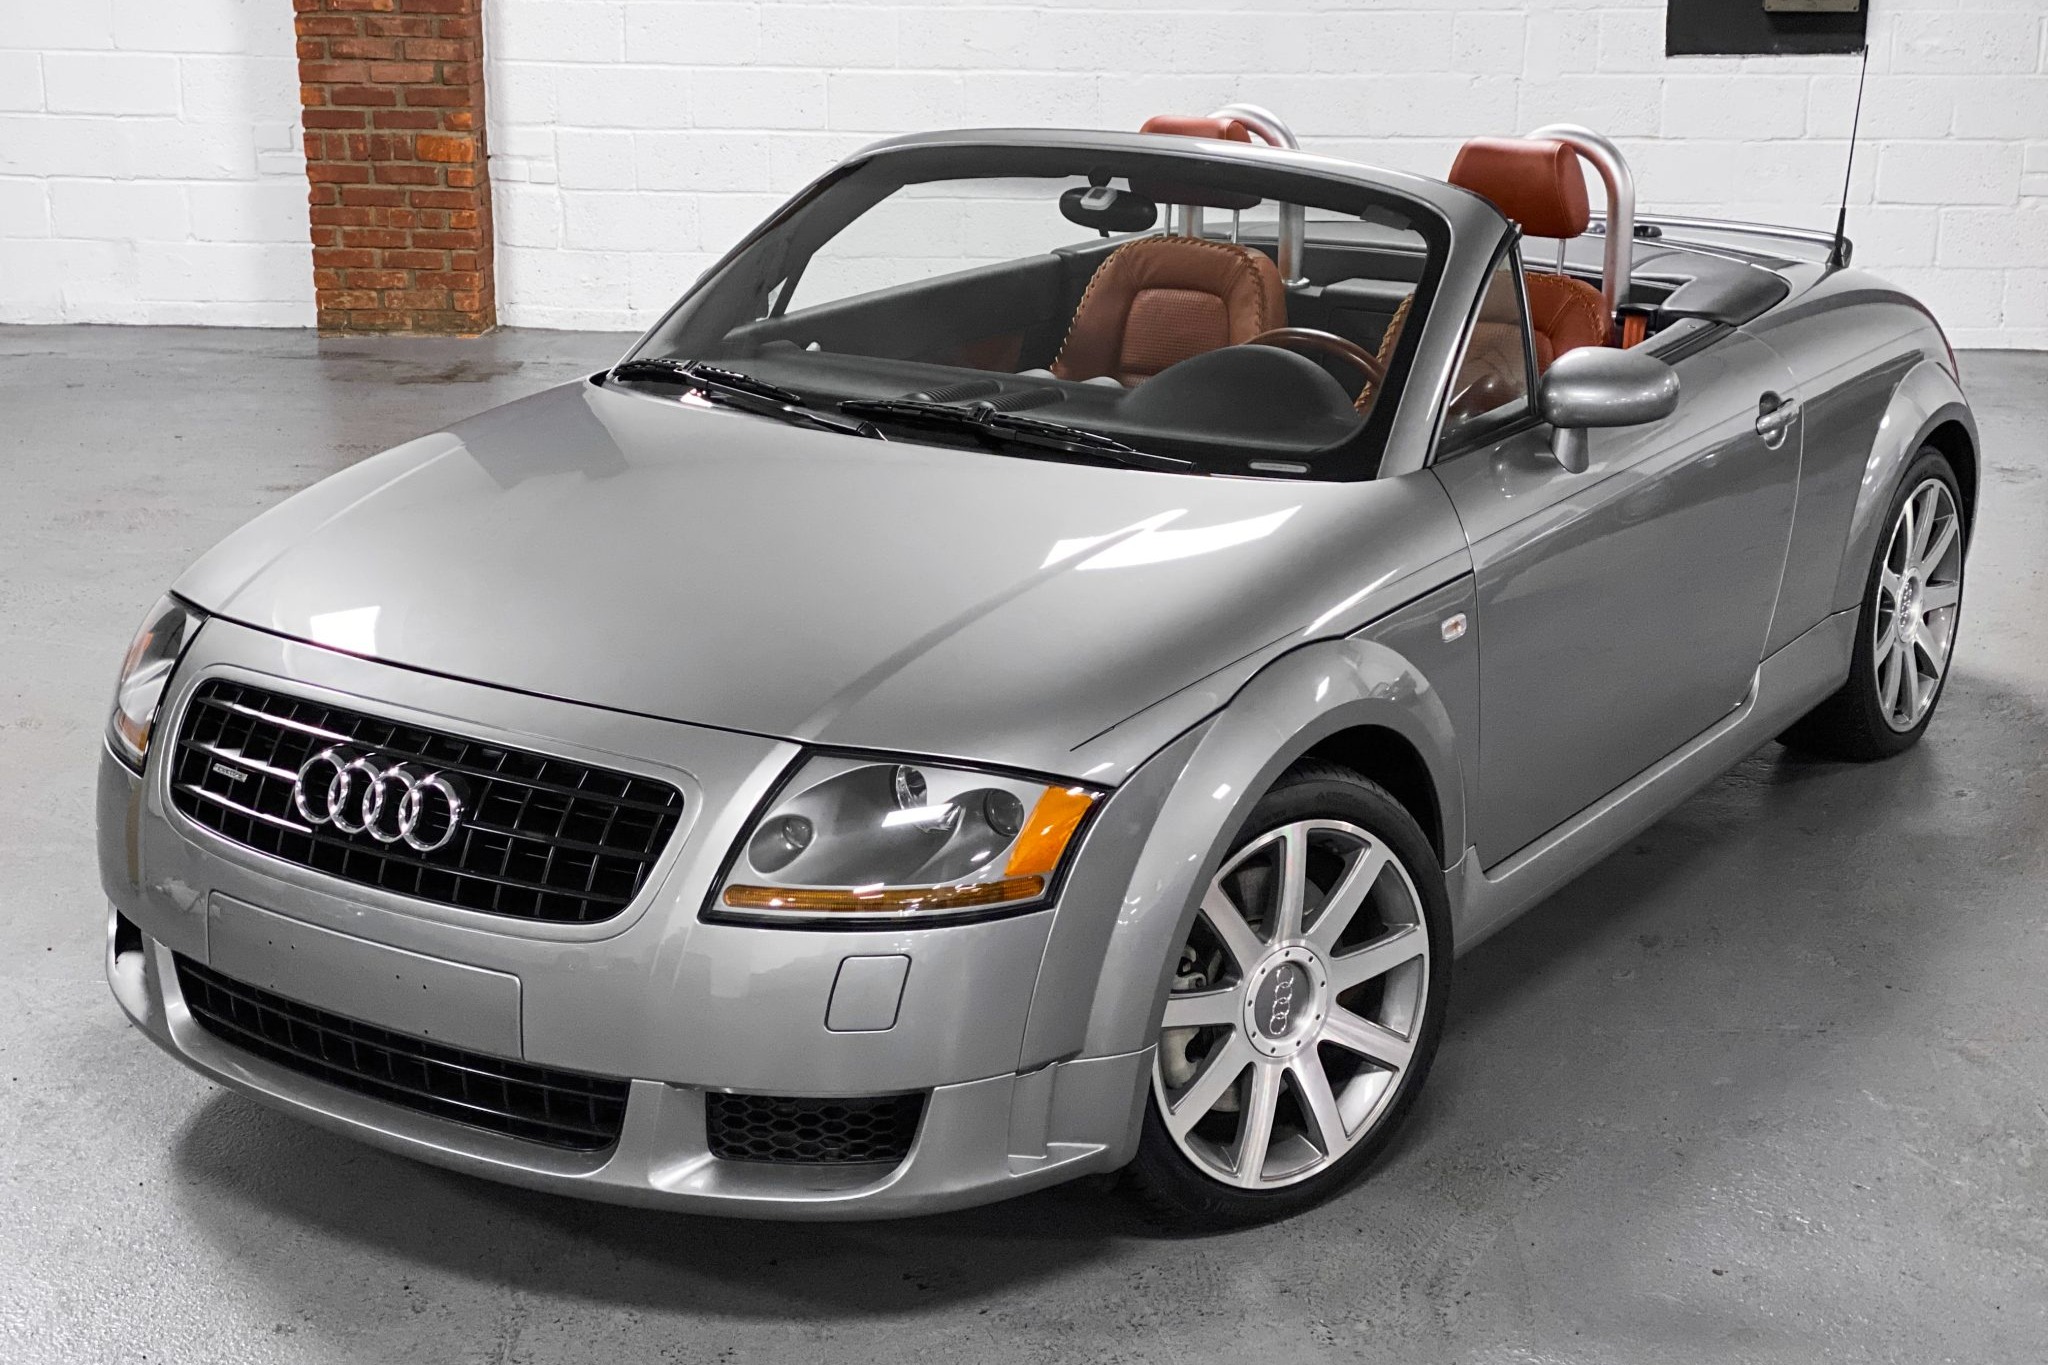 No Reserve: 20k-Mile 2006 Audi TT Roadster 3.2 Quattro Special Edition for  sale on BaT Auctions - sold for $34,000 on February 24, 2022 (Lot #66,599)  | Bring a Trailer